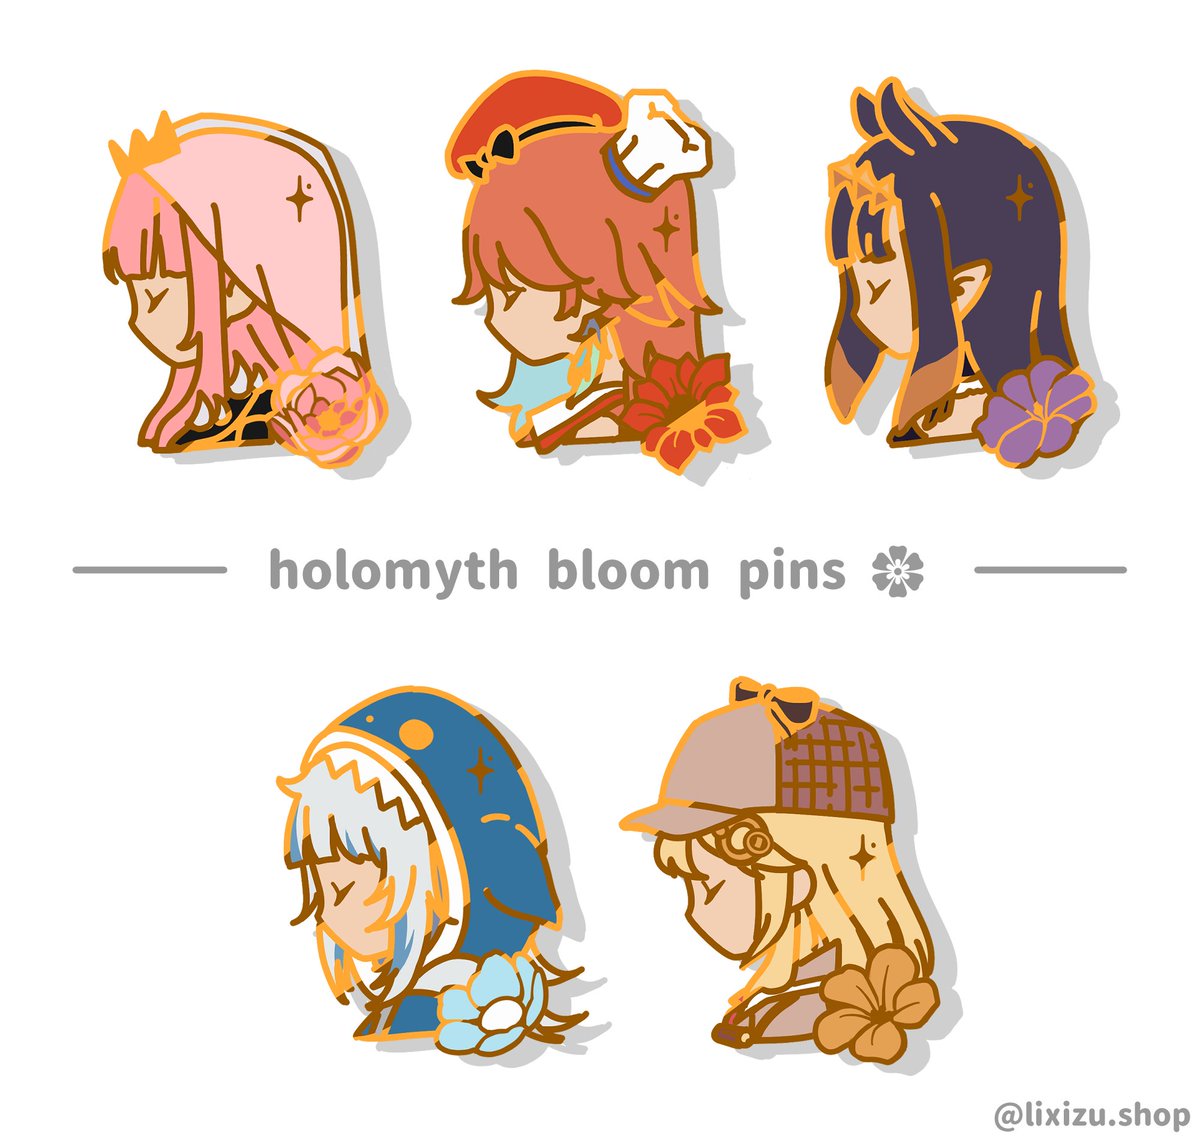 【RT's helps me a lot!】 my holomyth pins are now available on my site 💕 please let me know your favorite design, i'm curious!